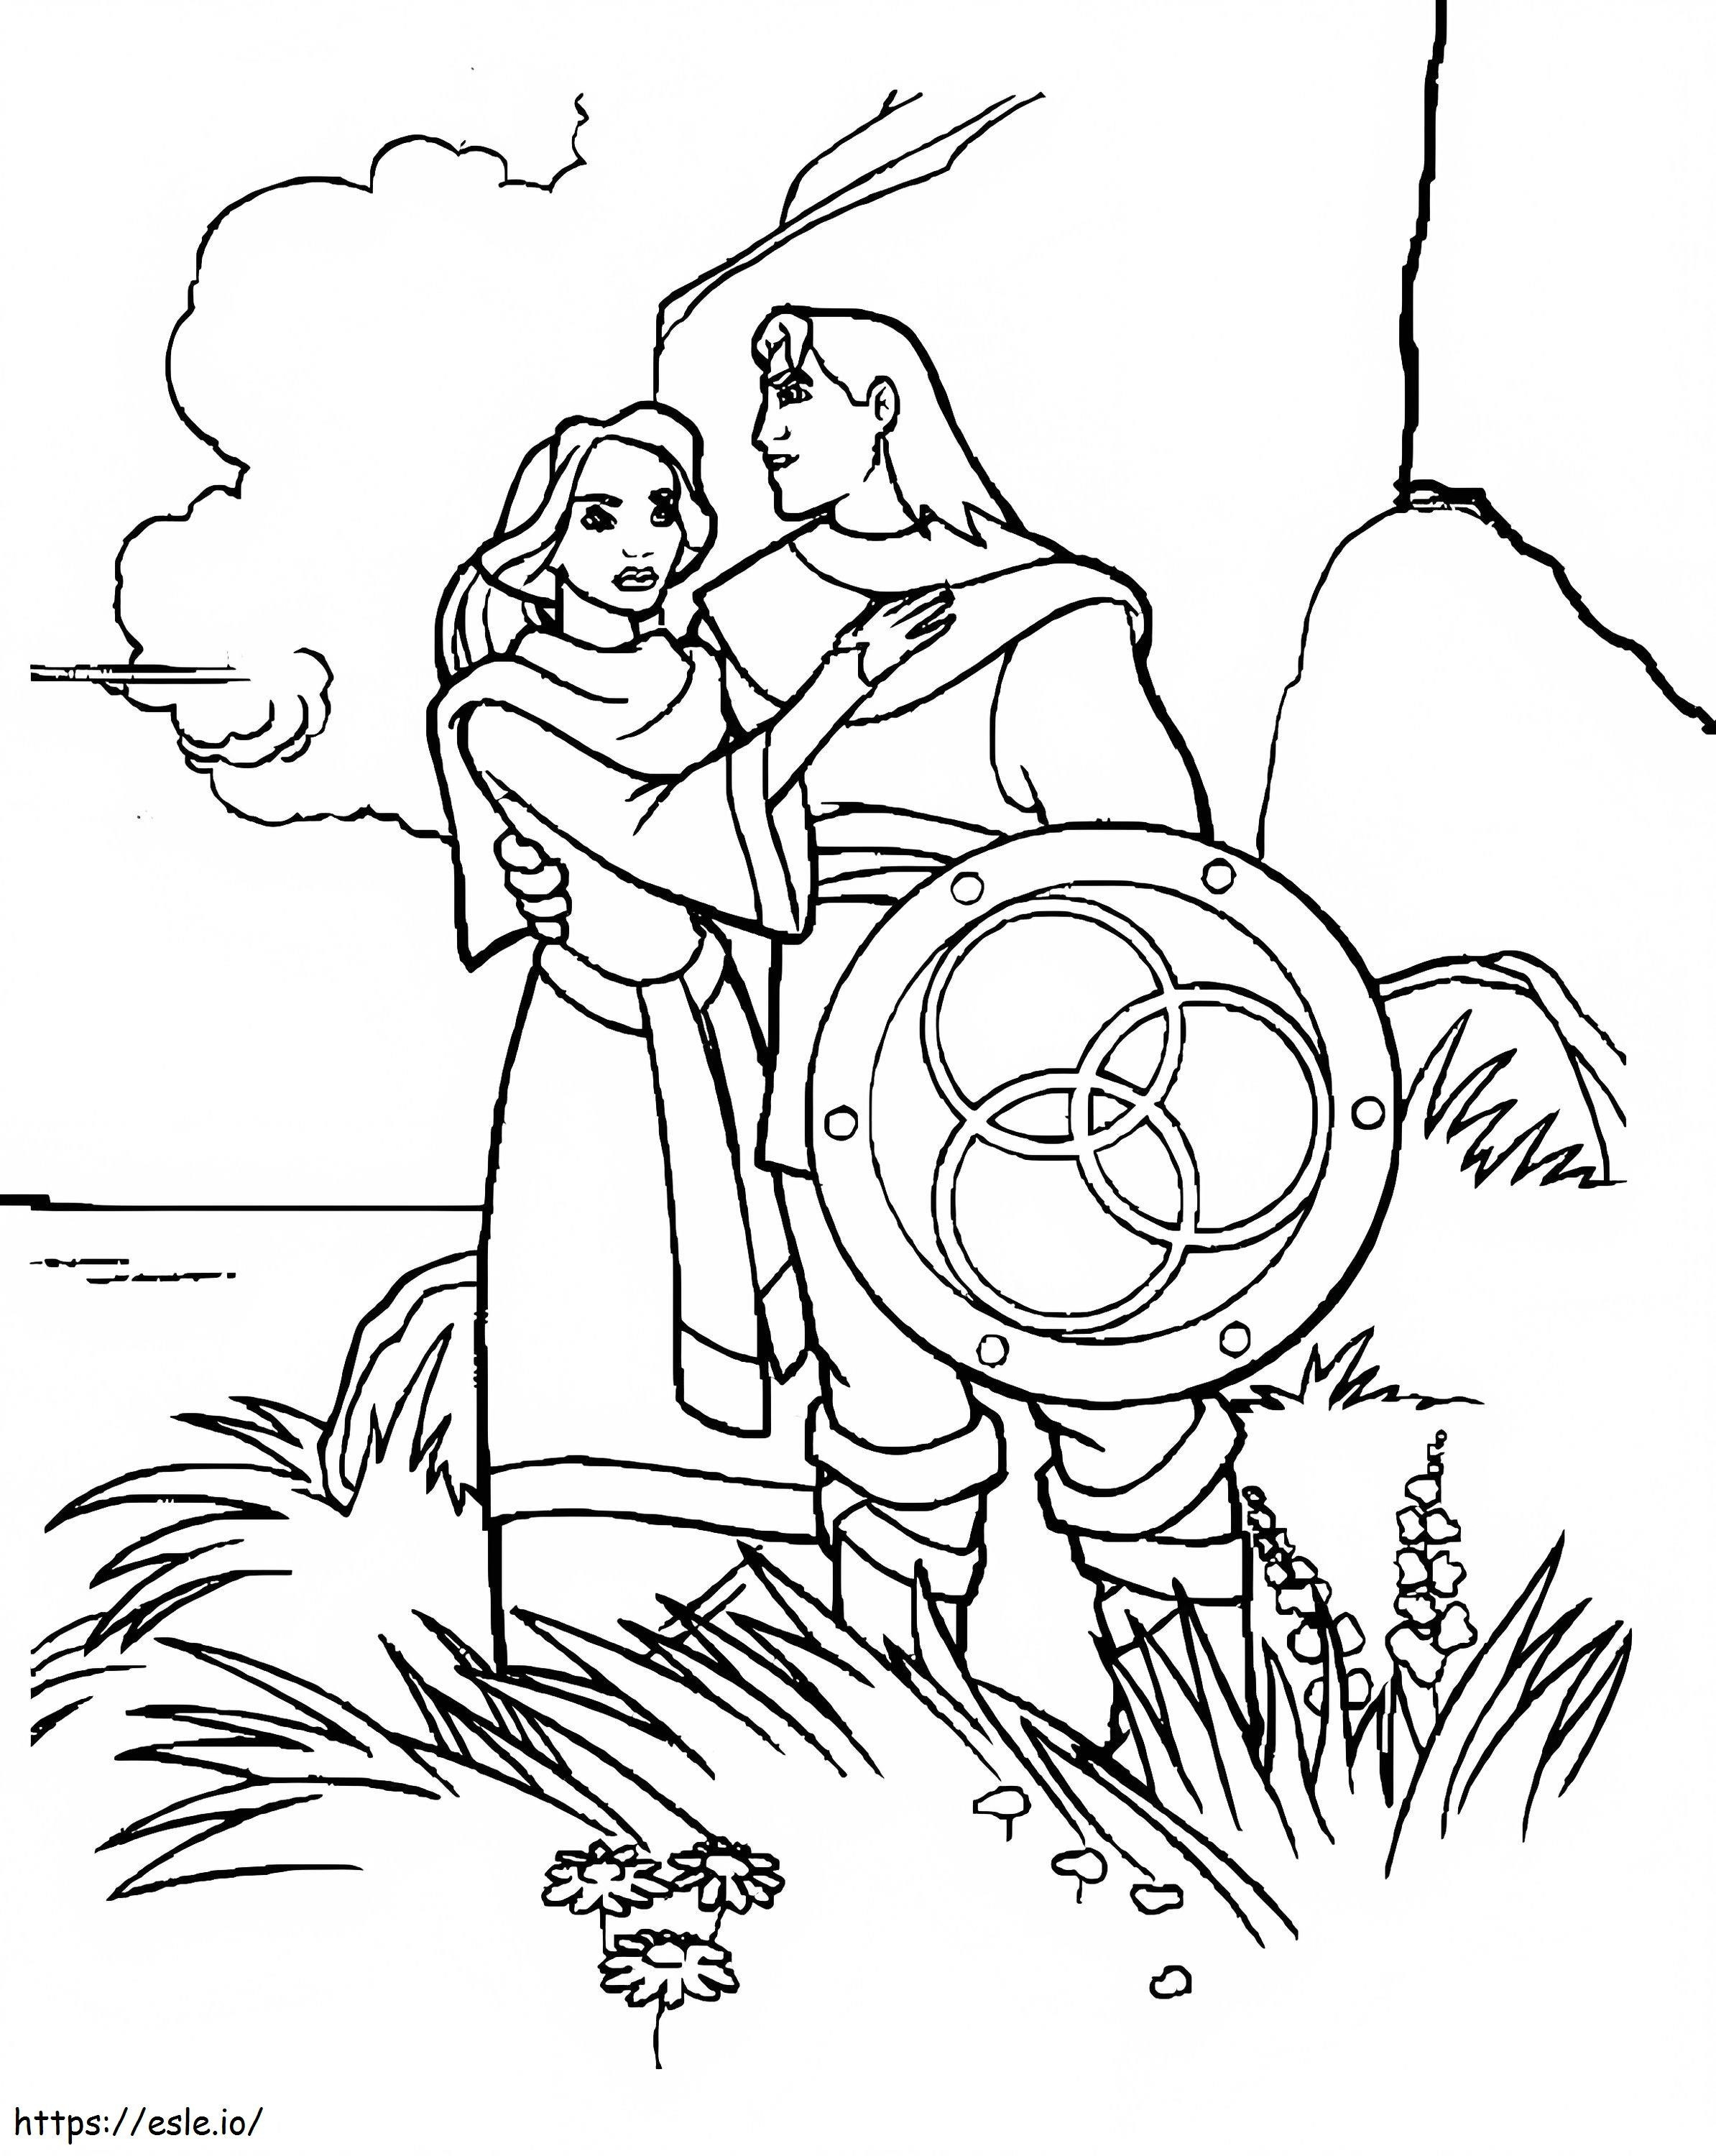 Quest For Camelot 4 coloring page